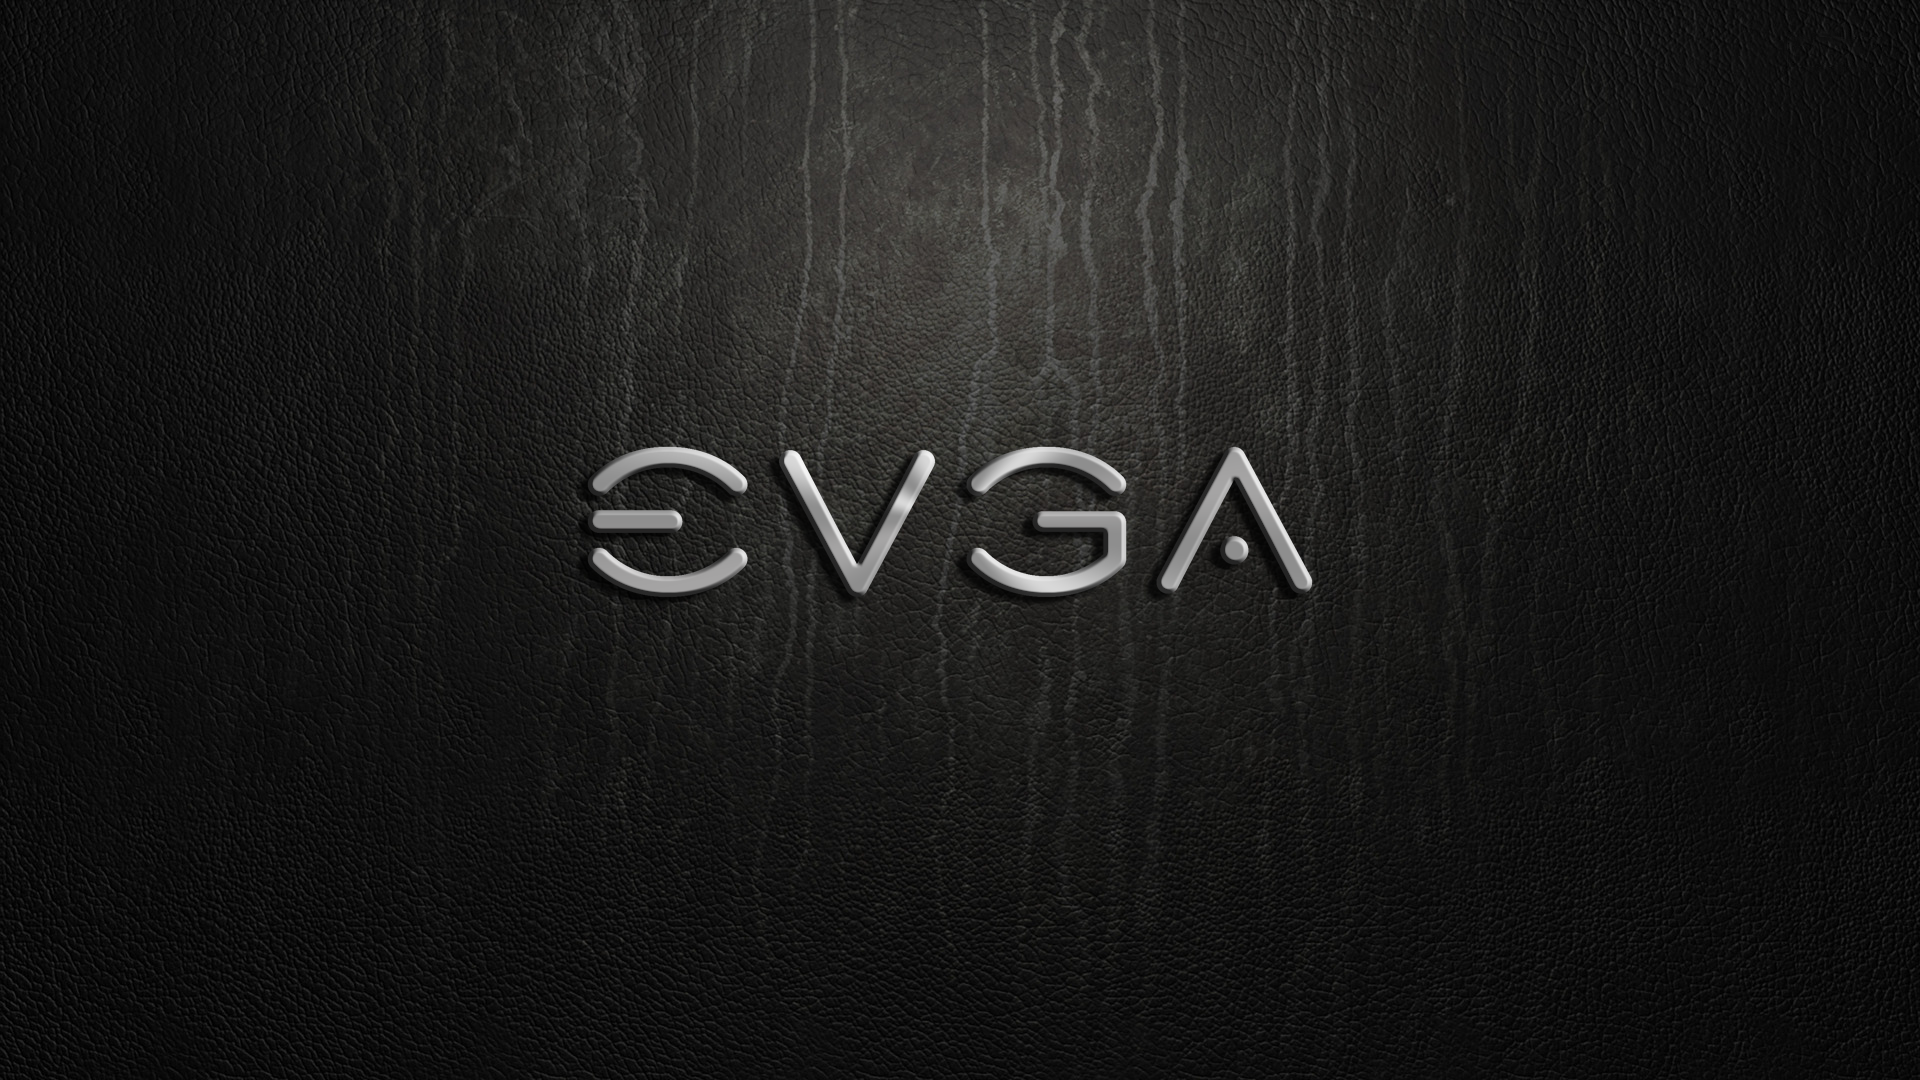 1 EVGA HD Wallpapers | Backgrounds - Wallpaper Abyss